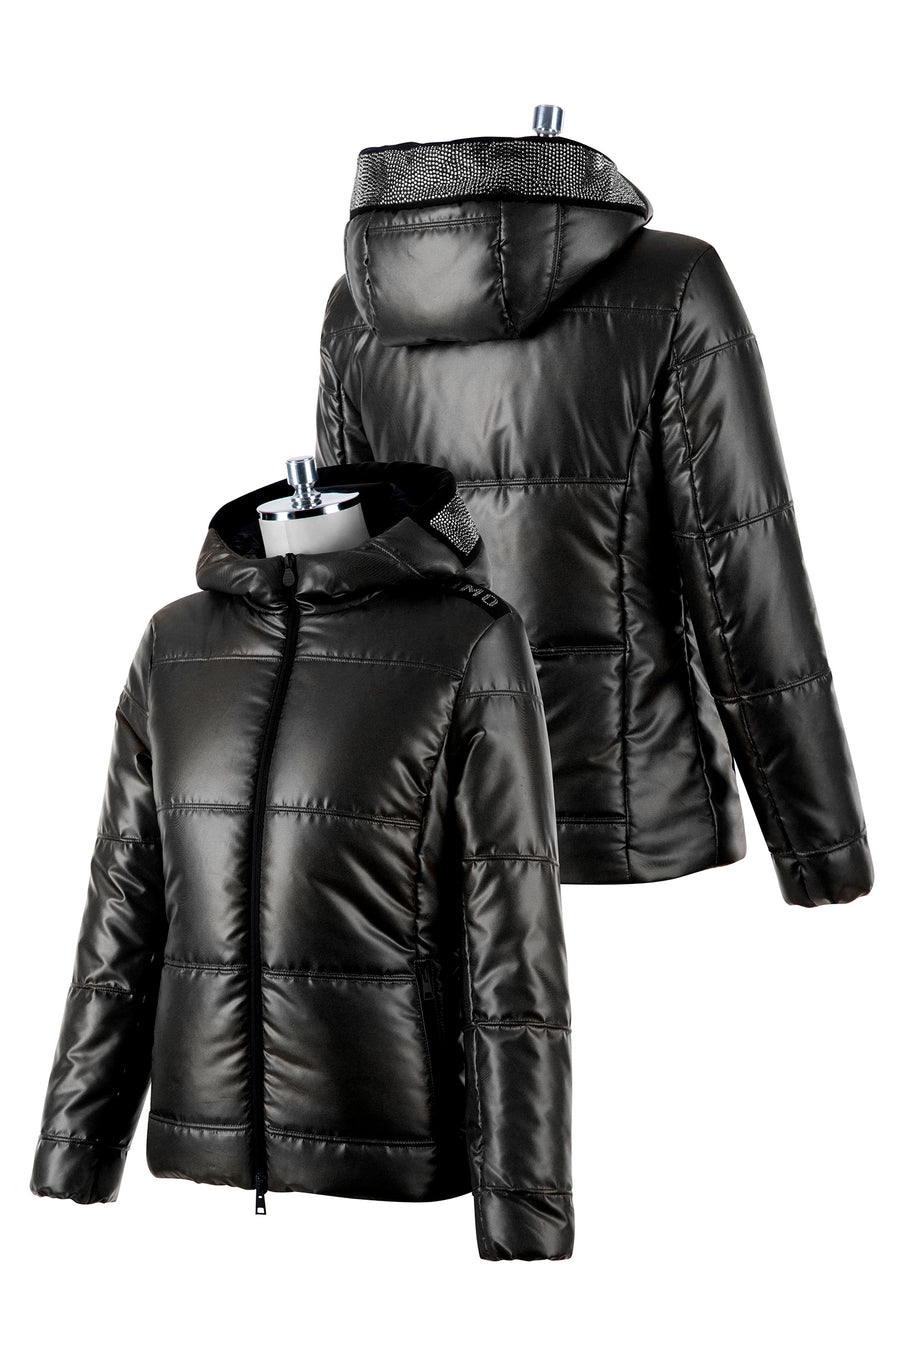 Black Women's extra light jewel padded jacket with hood. Snap button to block the hood. Animo logo on the left shoulder and precious design on the hood – both in rhinestone.